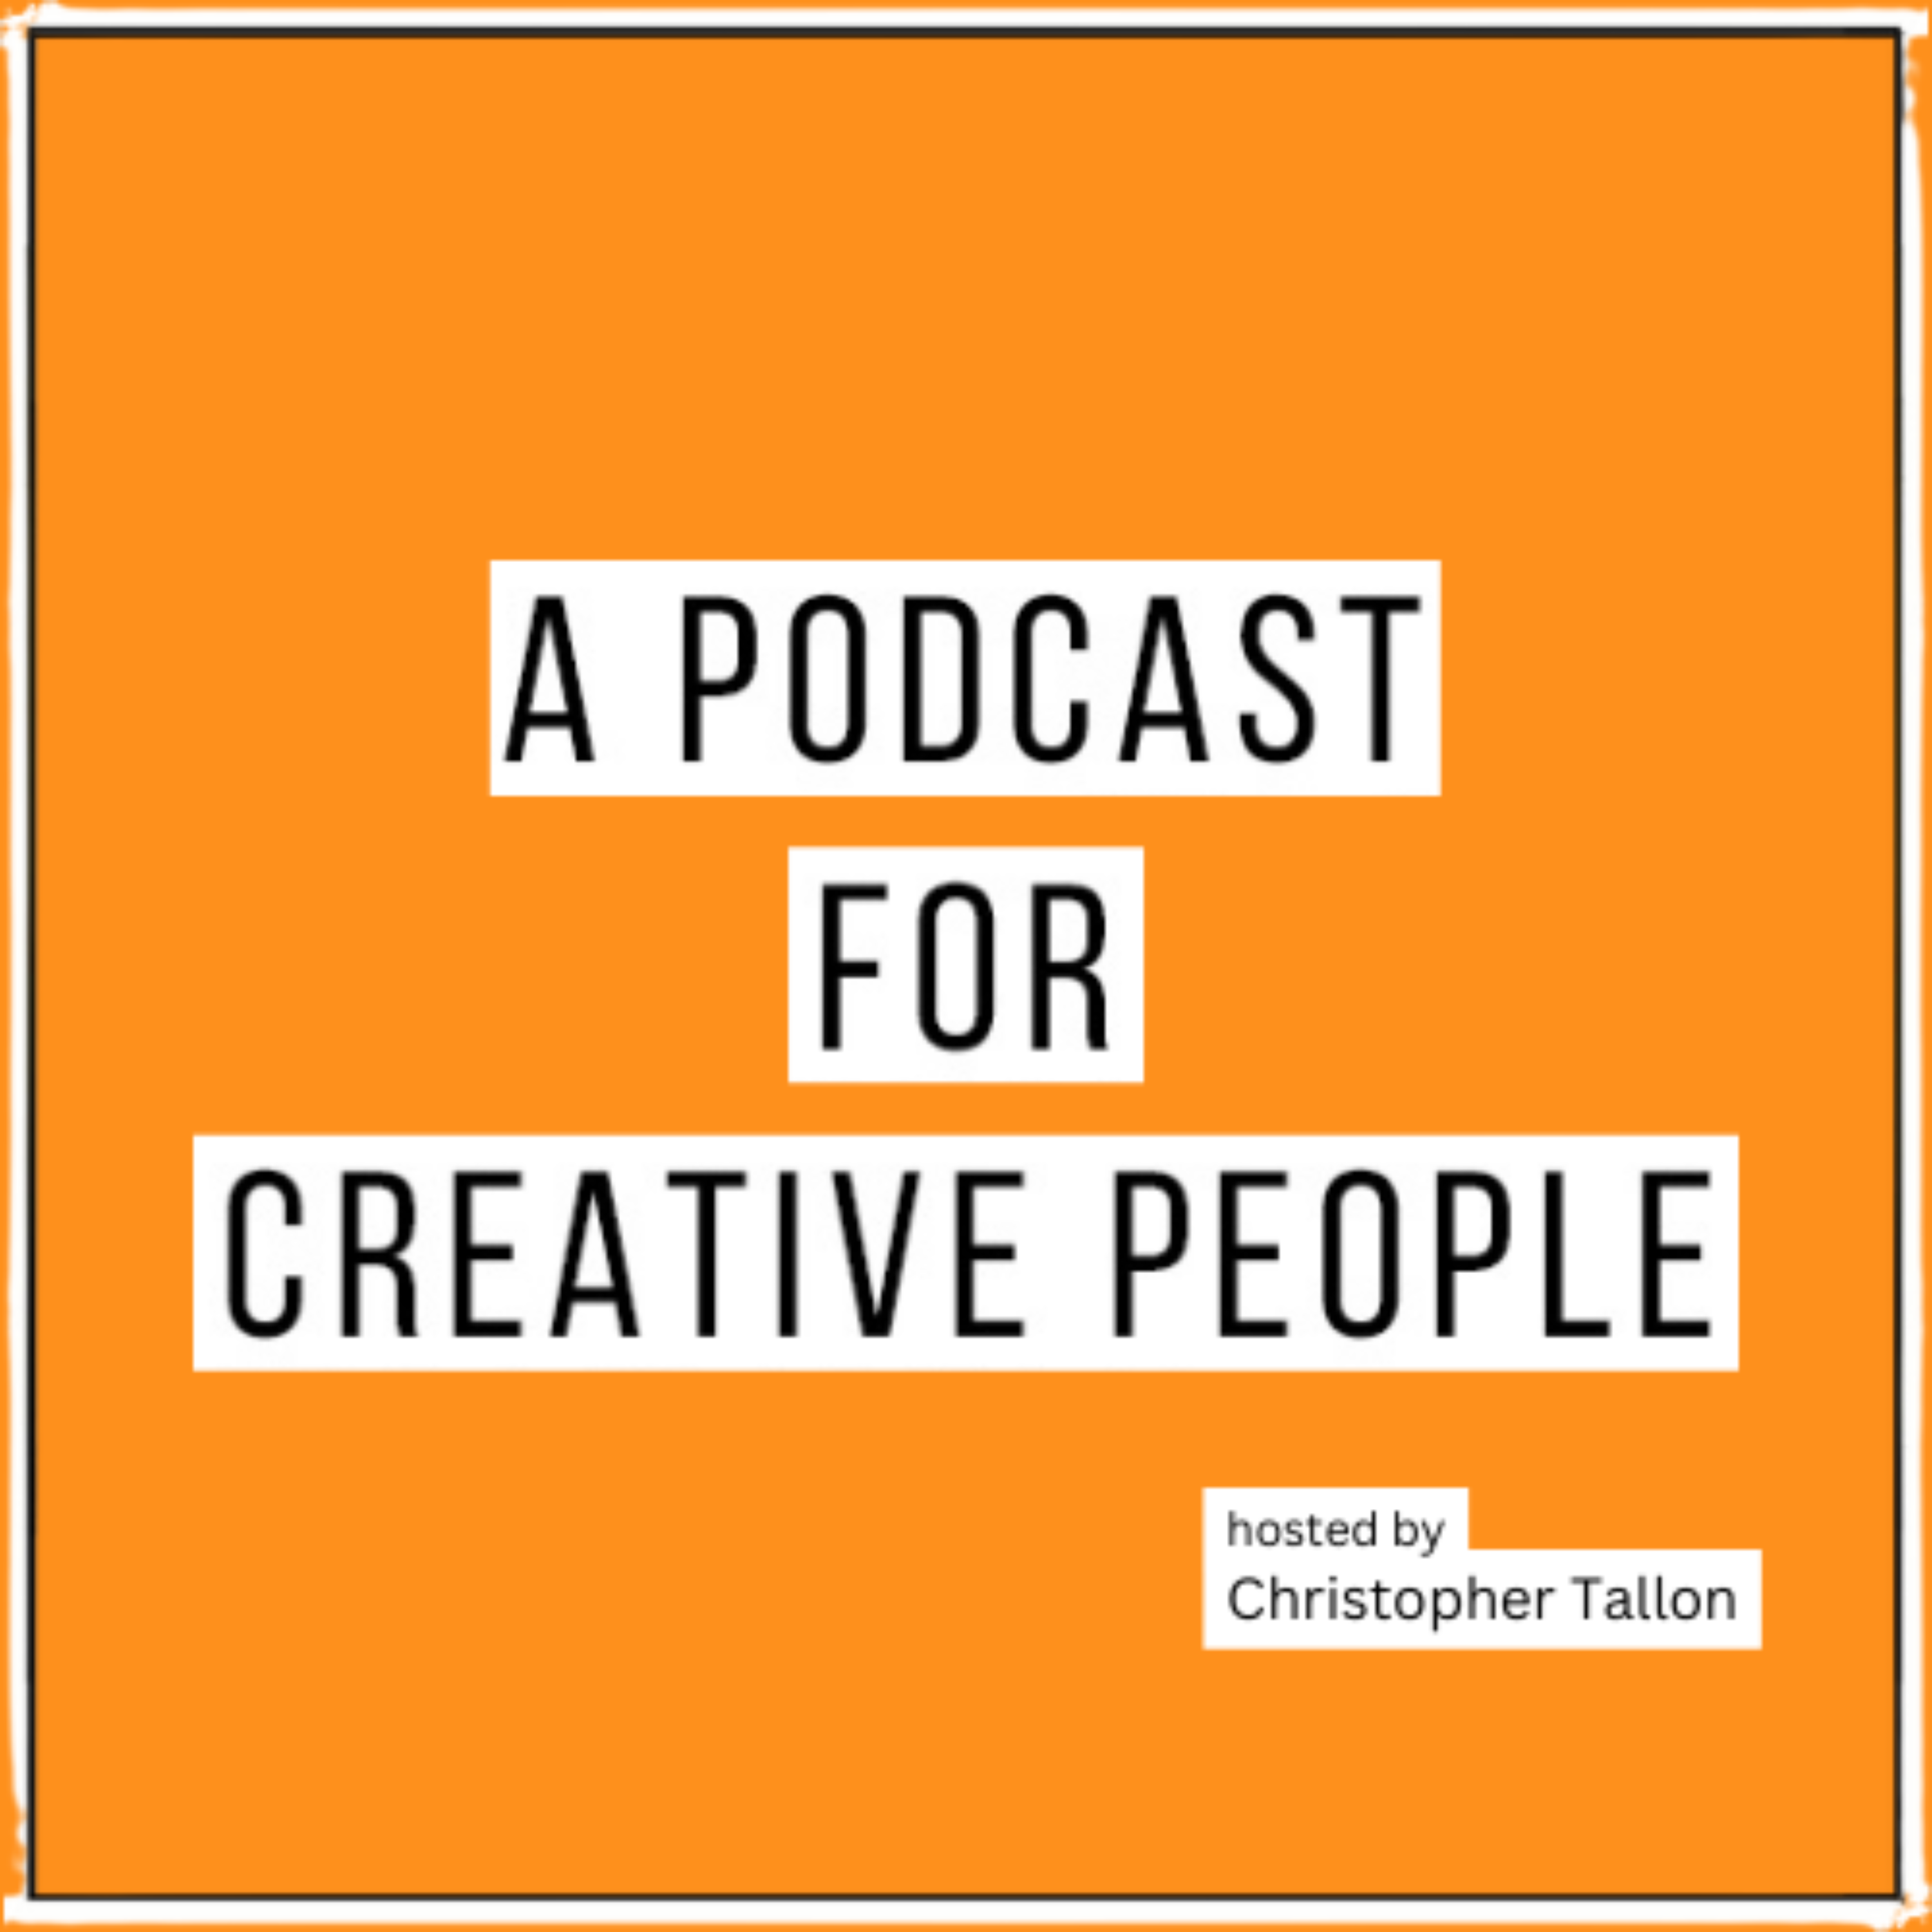 A Podcast for Creative People